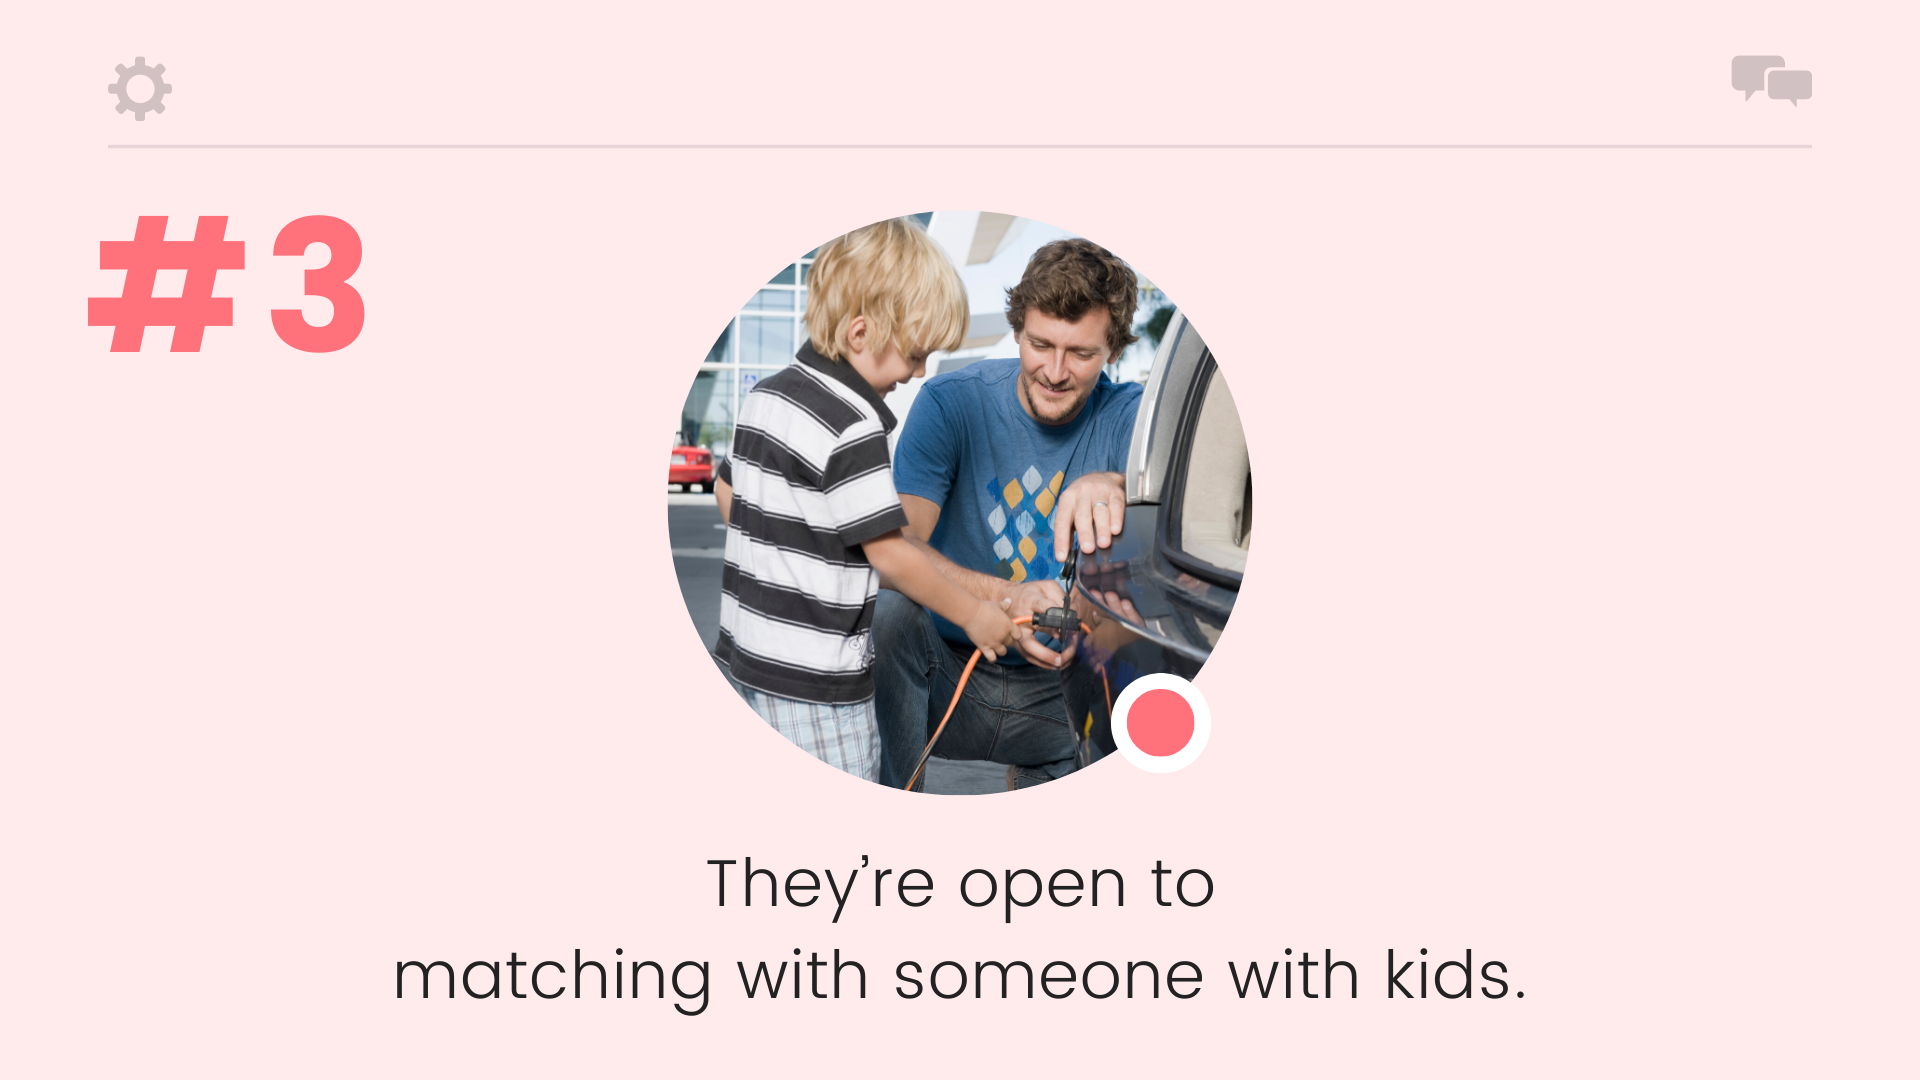 They're open to matching with someone with kids.